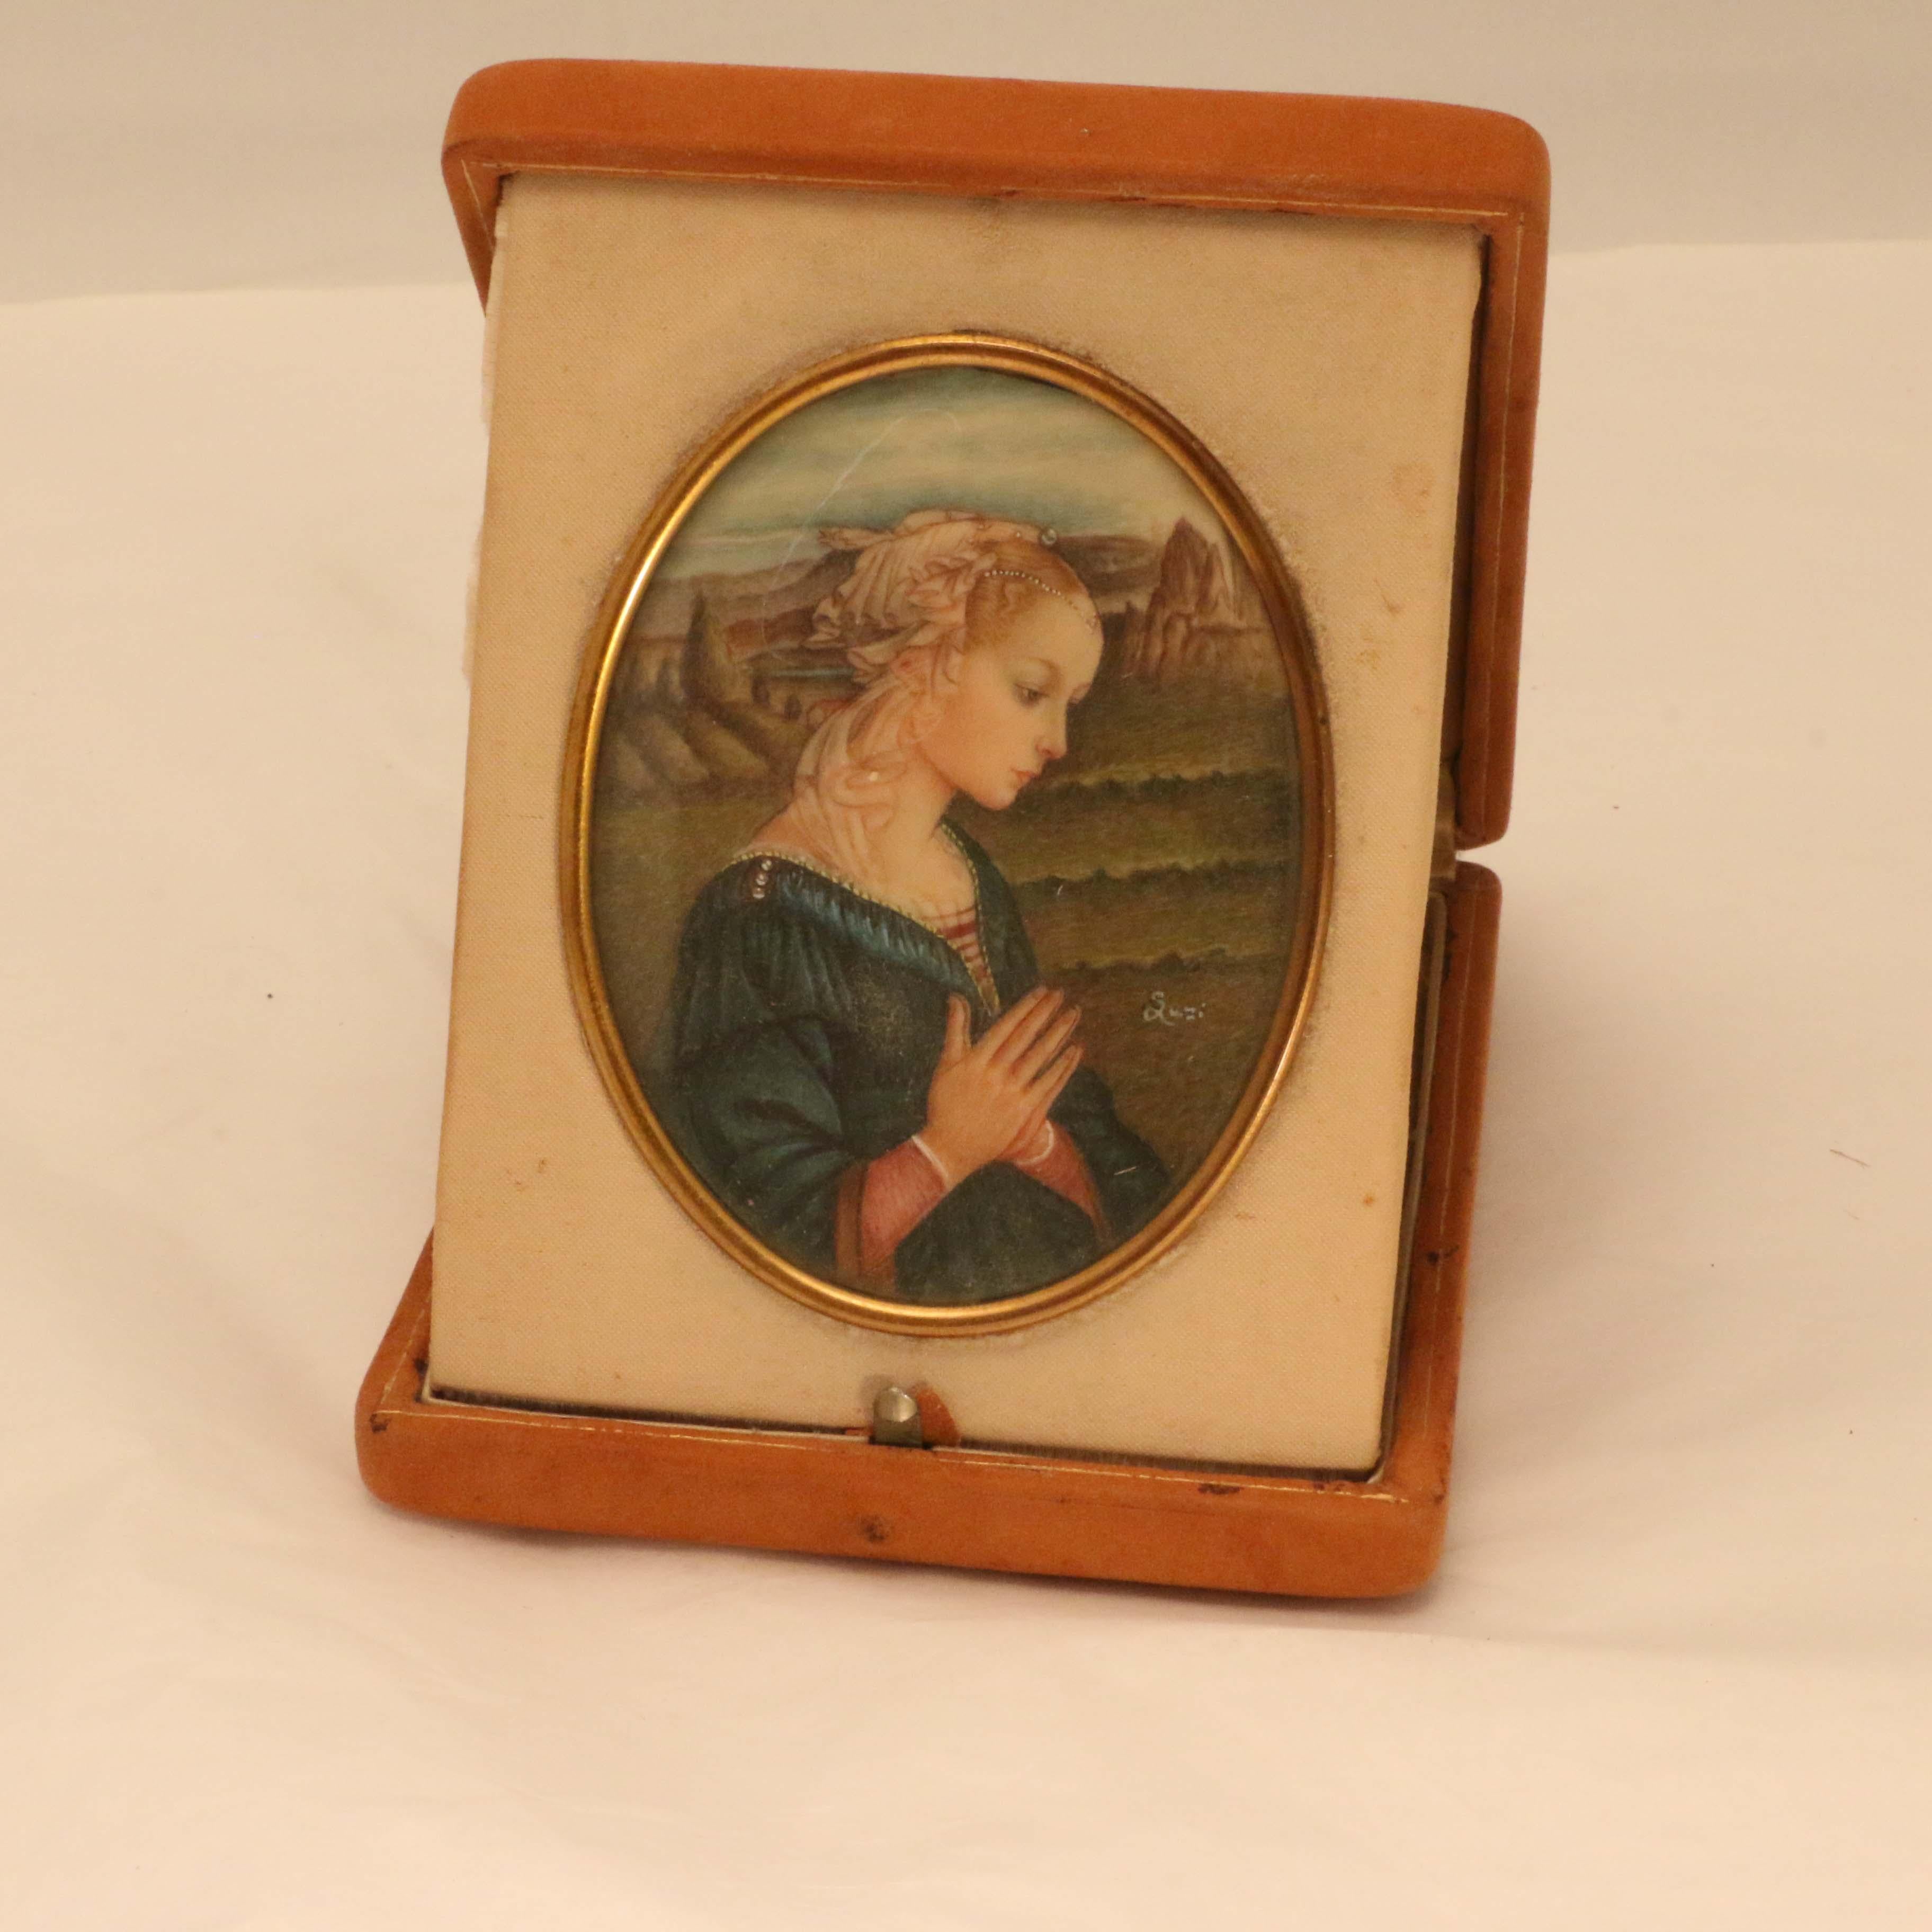 The miniature is a copy of the famous work by Fra Lippi. The artist captures the beauty and stillness of the young Madonna so successfully rendered in the original. Judging by the case we suggest circa 1875 although the miniature may be older. It is